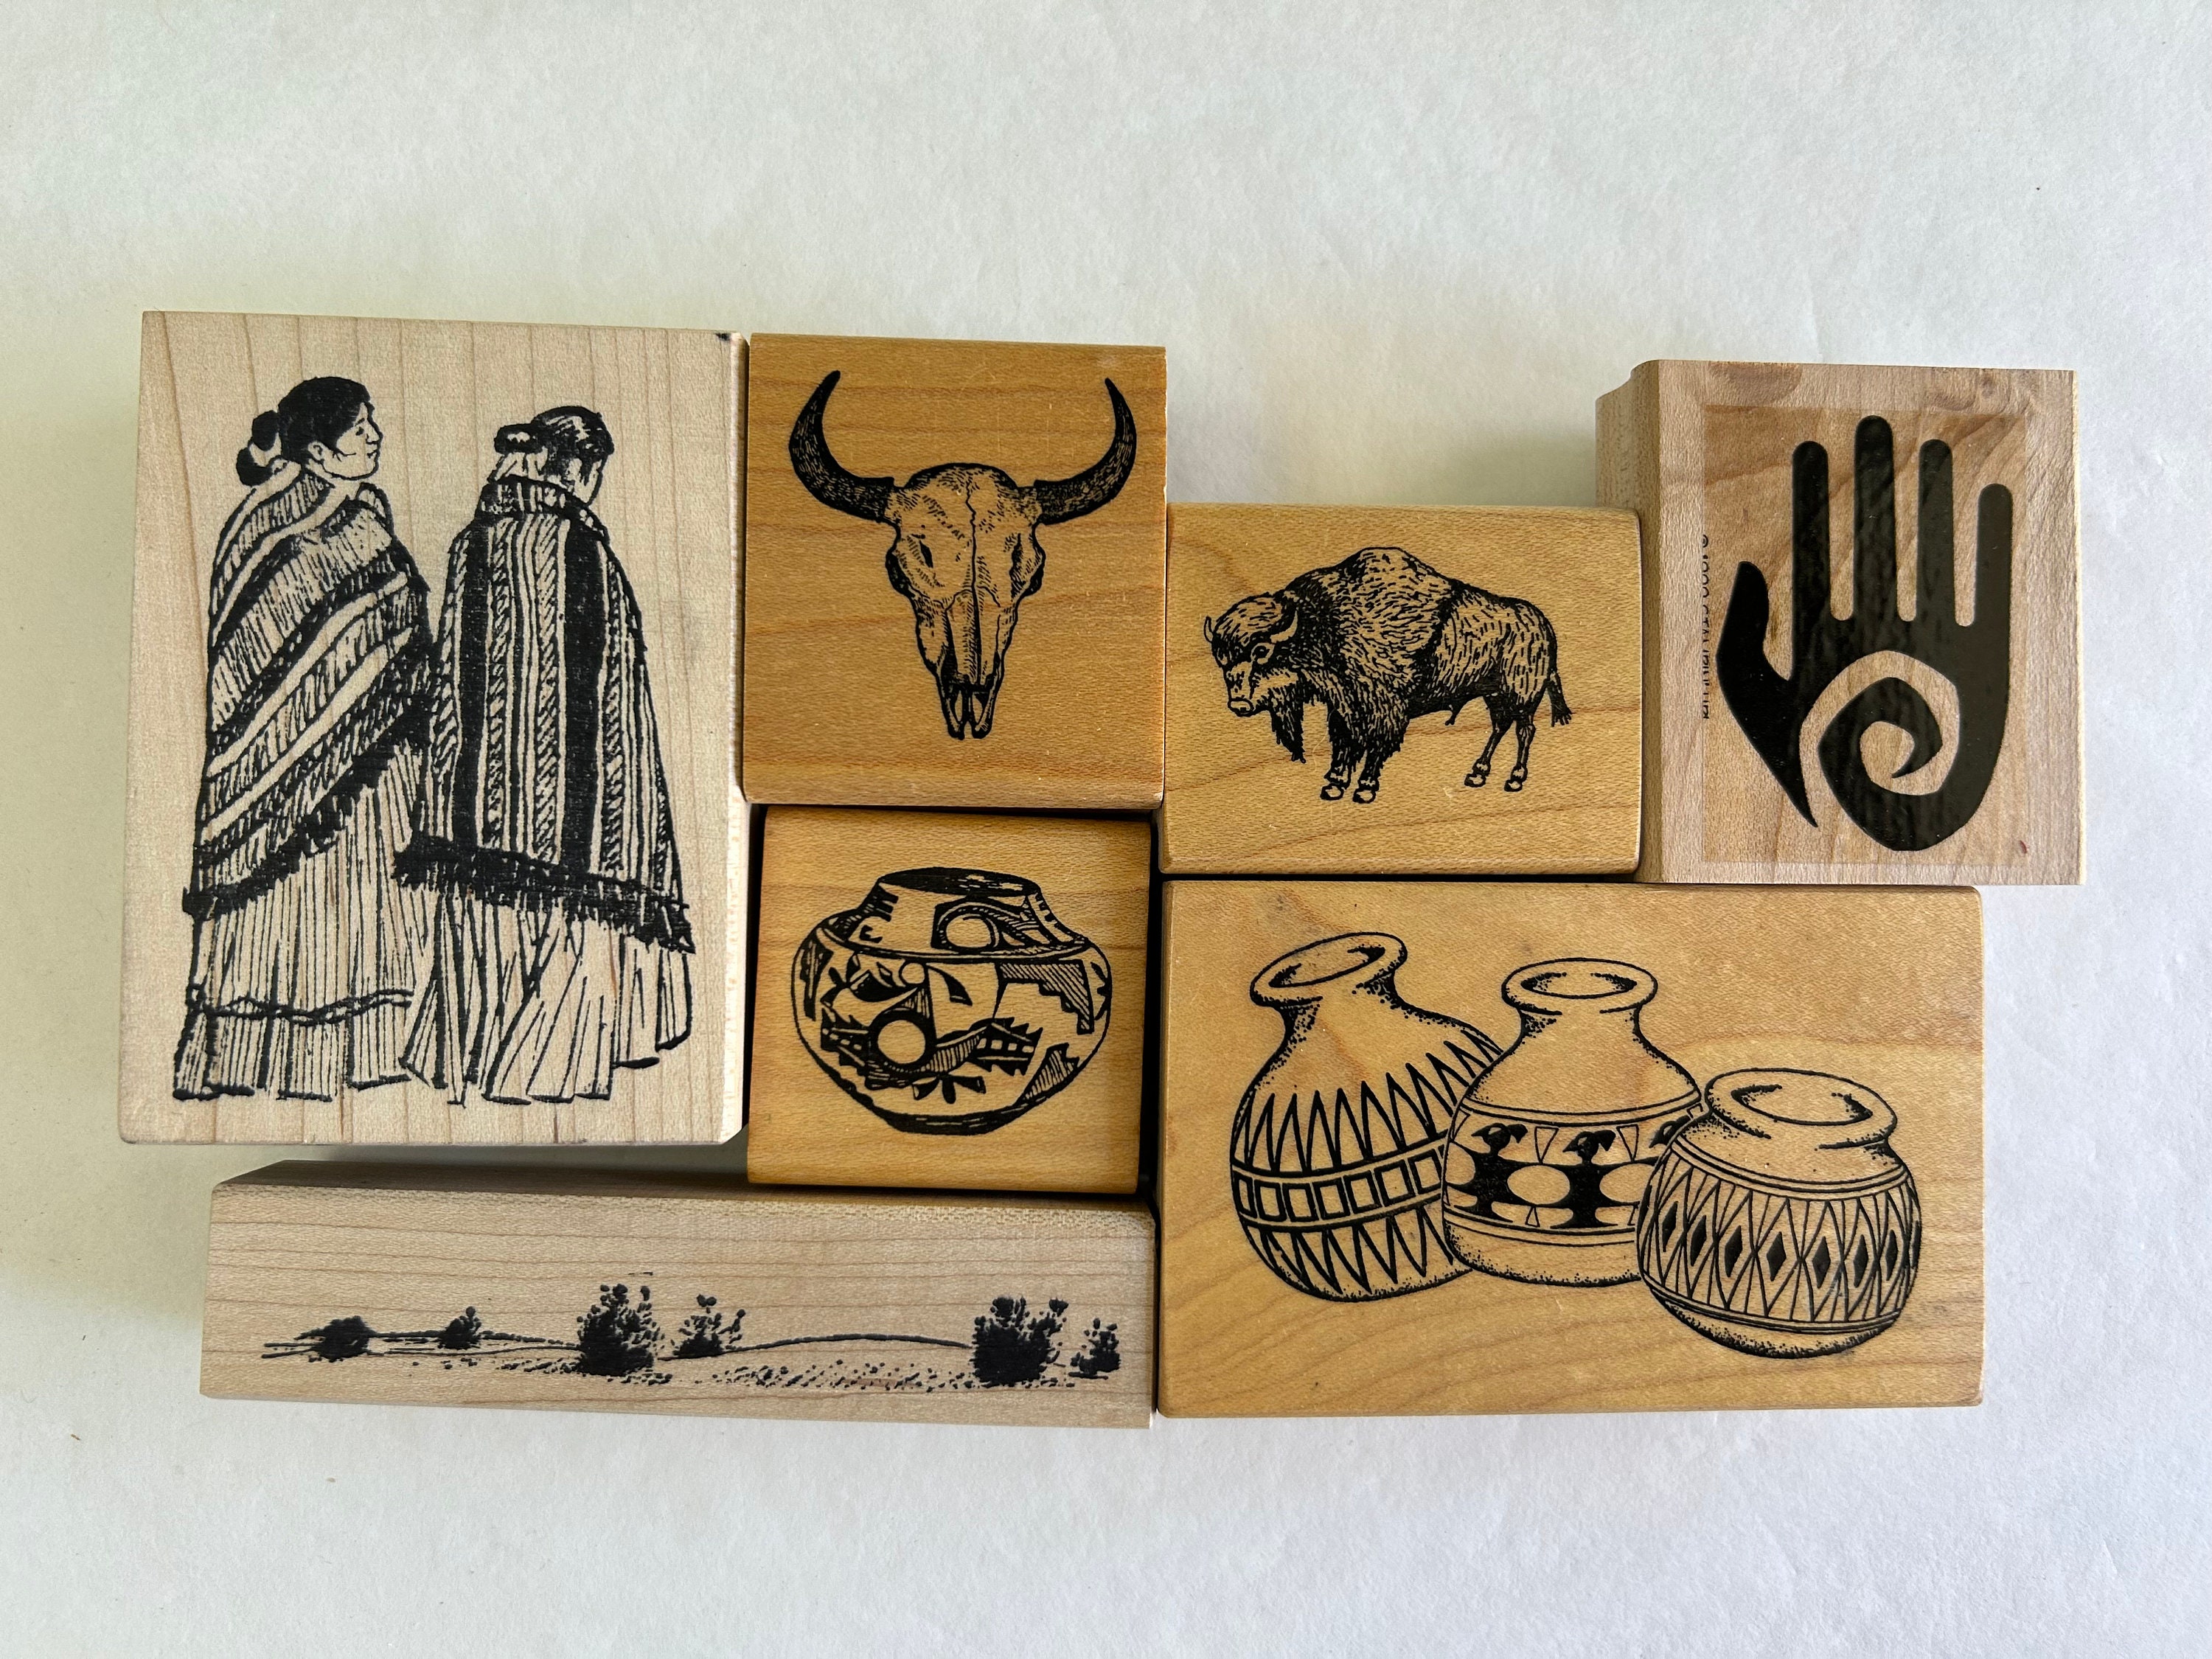 Mexican Flower Rubber Stamp, Flower Stamp, Mexican Stamp, Wooden